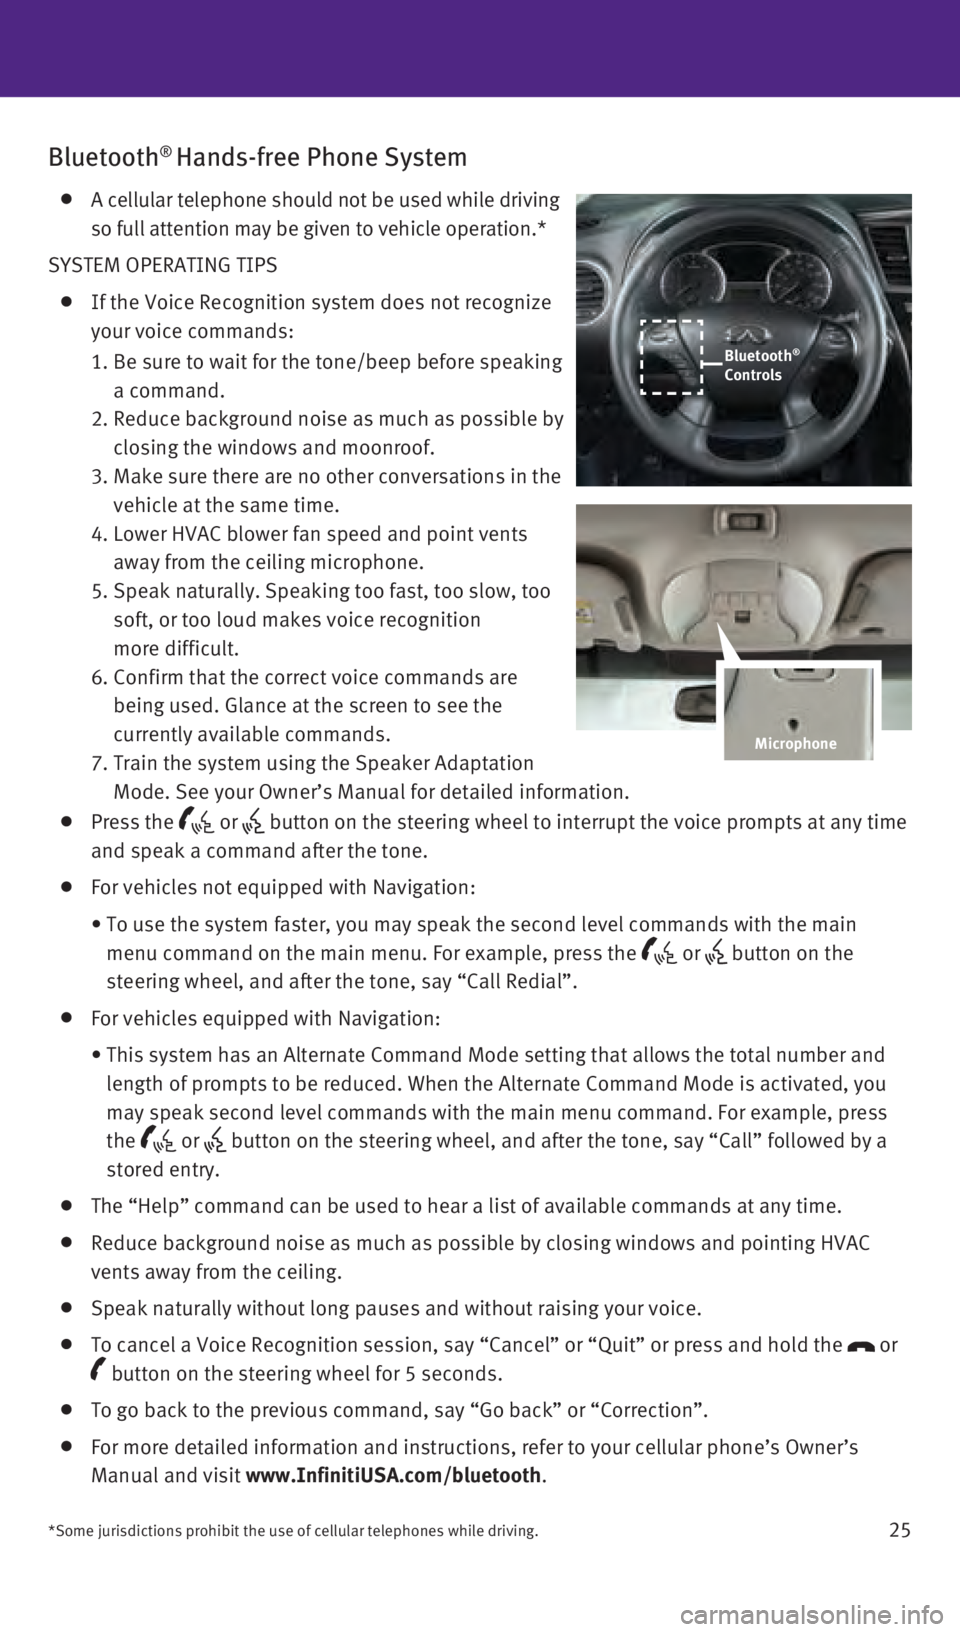 INFINITI QX60 2016  Quick Reference Guide 25
Bluetooth® Hands-free Phone System
    A cellular telephone should not be used while driving 
so full attention may be given to vehicle operation.*
SYSTEM OPERATING TIPS
   If the Voice Recognitio